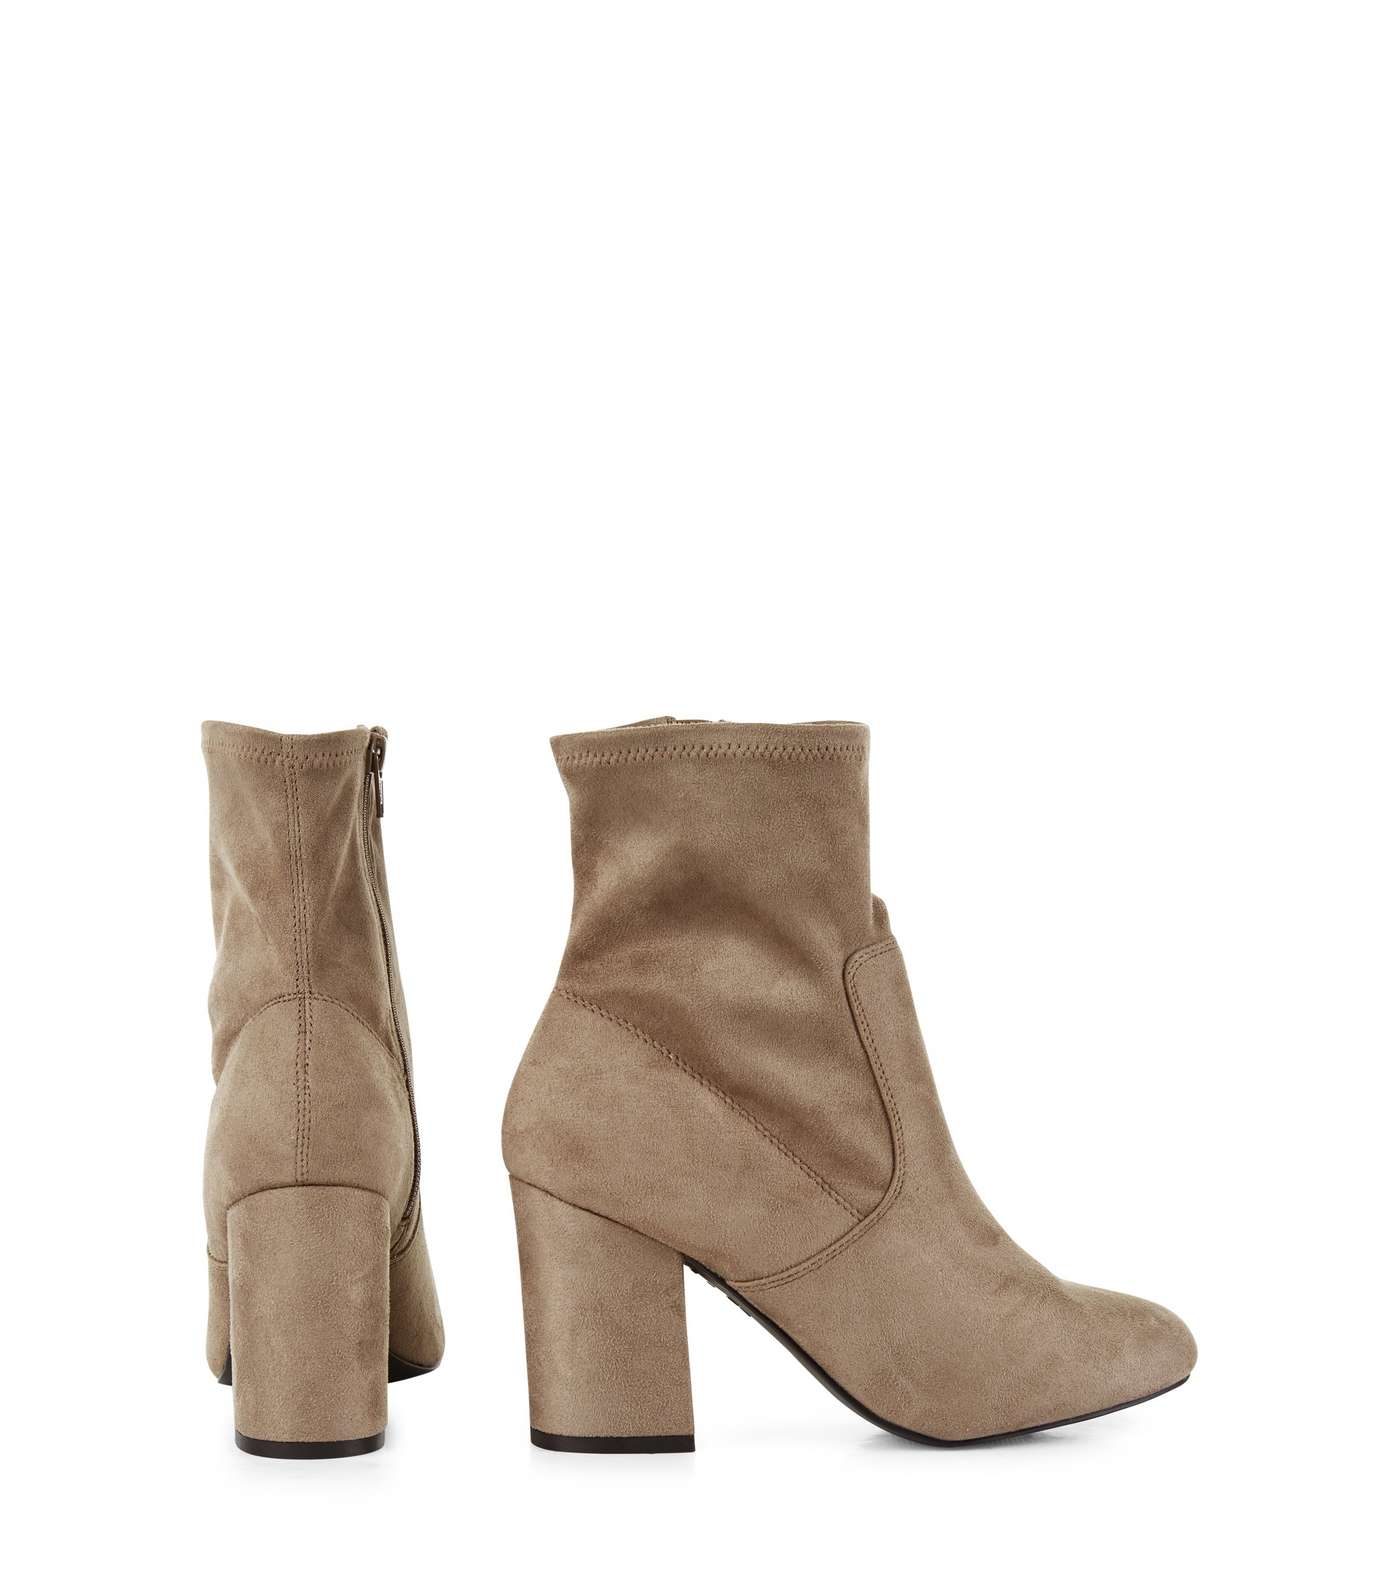 Grey Suedette Block Heel High Ankle Boots  Image 4